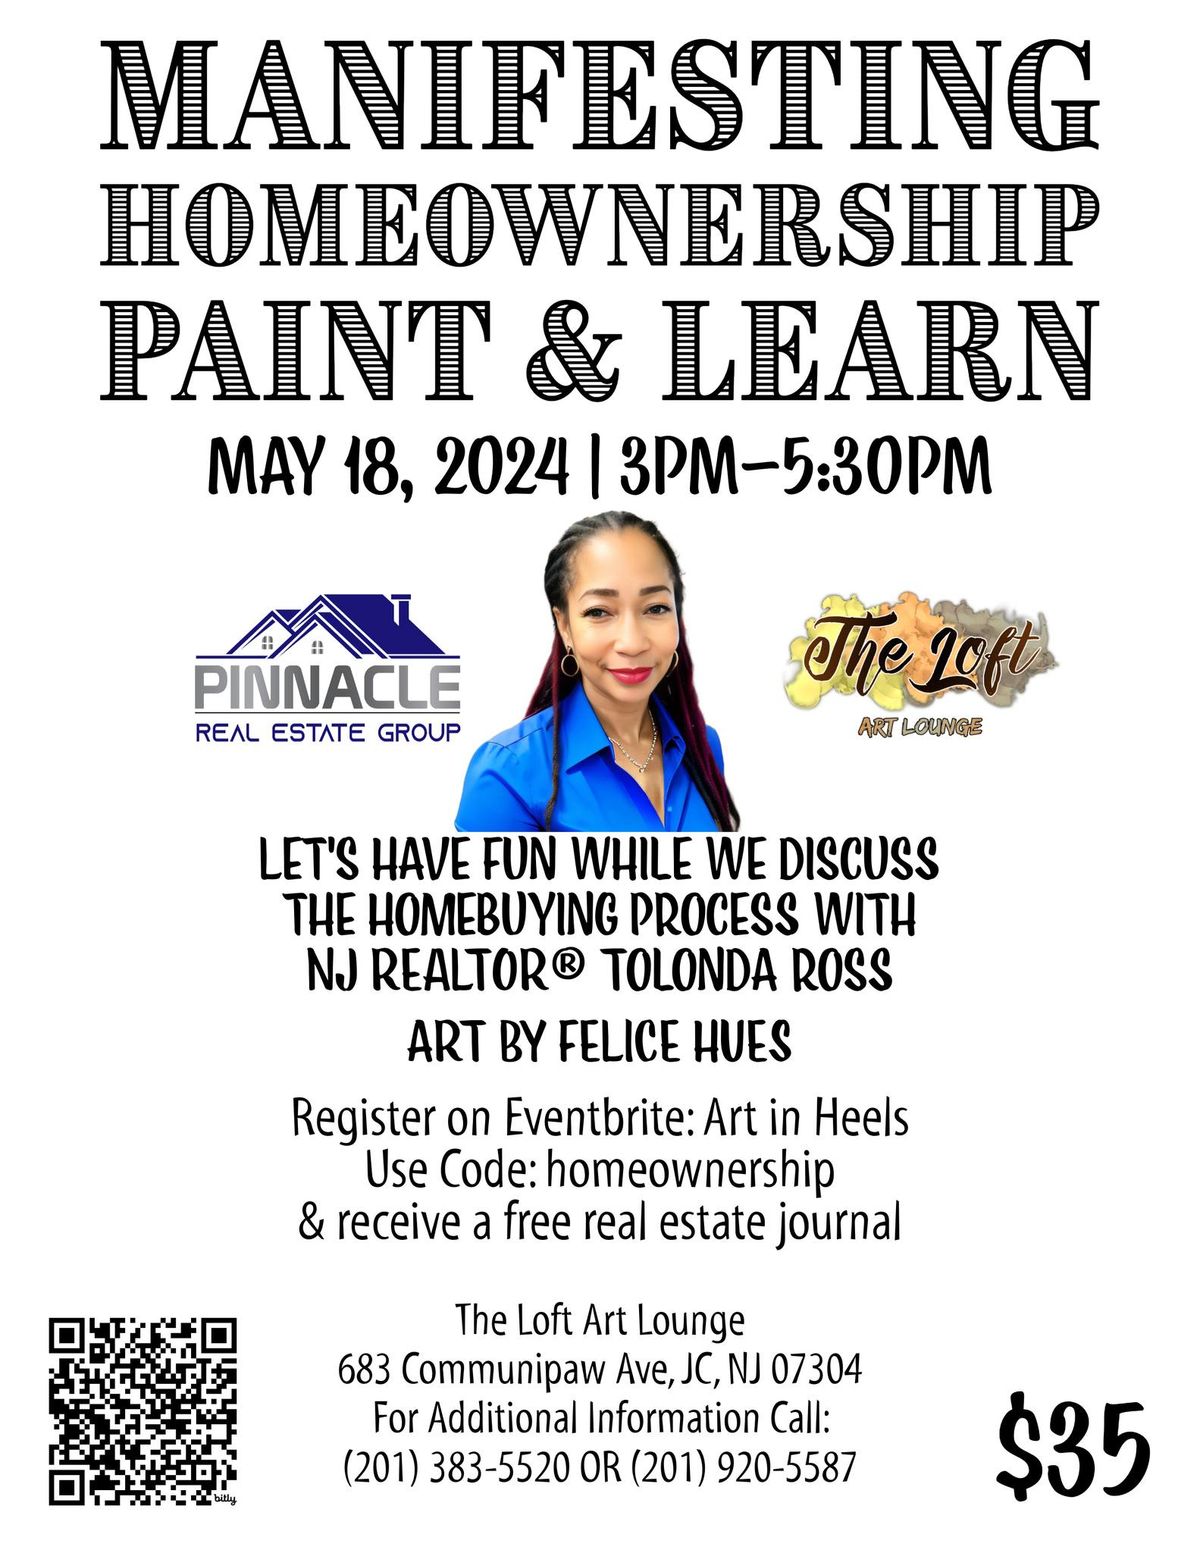 Welcome to Manifesting Homeownership Paint and Learn!